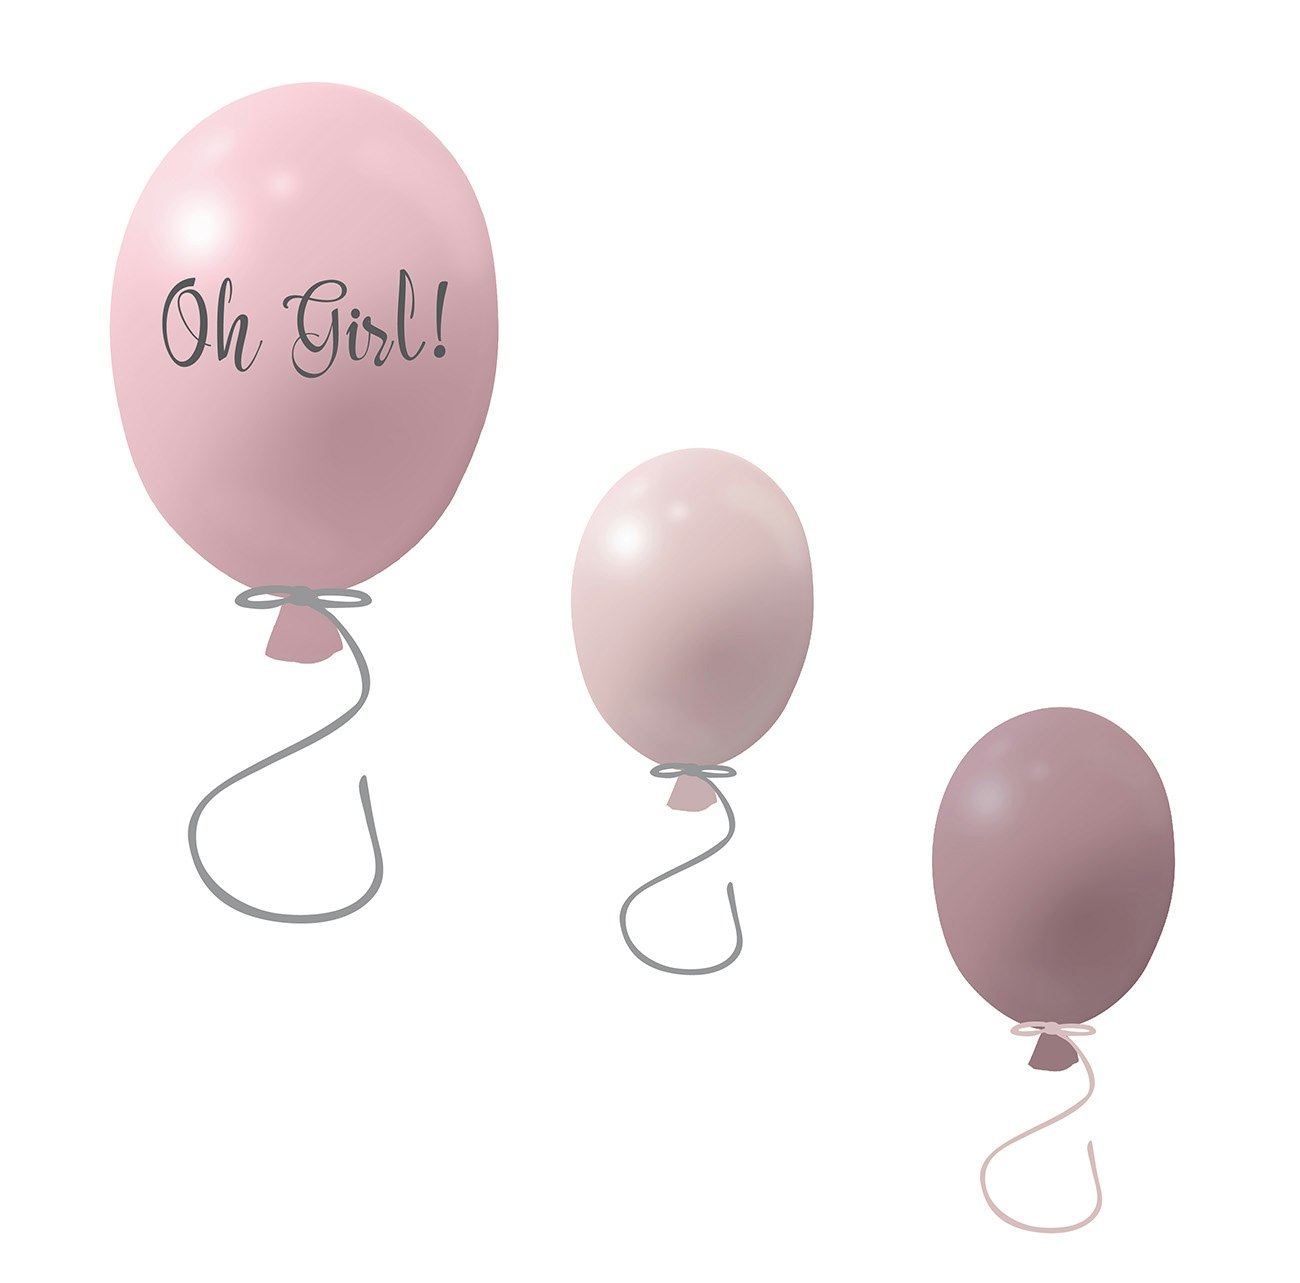 Wall sticker party balloons set of 3, rose Wall sticker party balloons set of 3, rose